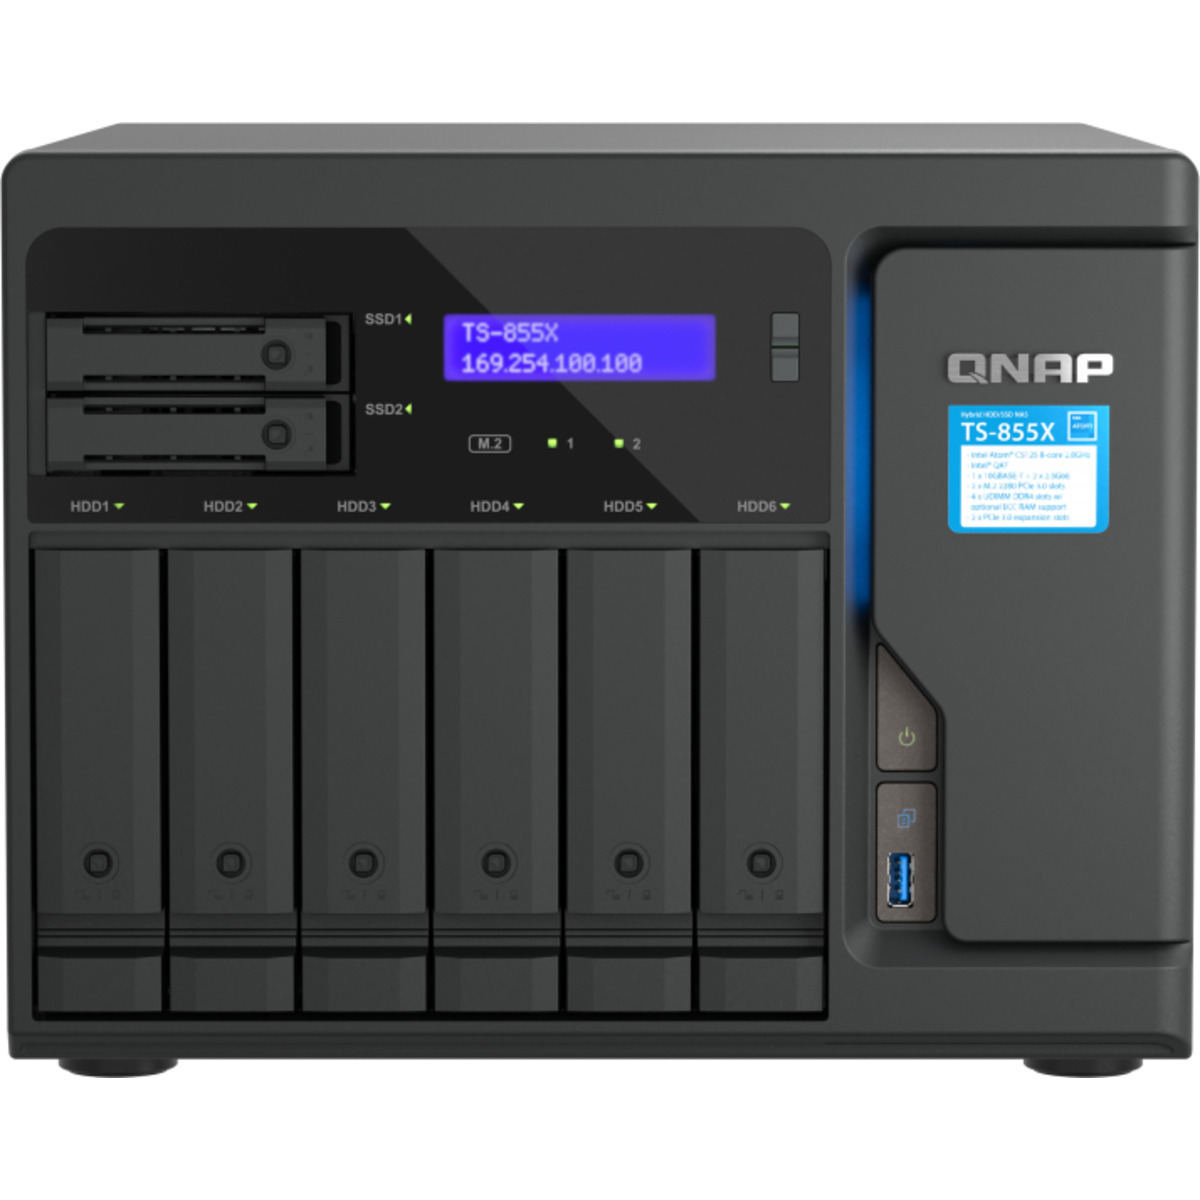 buy $4835 QNAP TS-855X 120tb Desktop NAS - Network Attached Storage Device 6x20000gb Western Digital Red Pro WD201KFGX 3.5 7200rpm SATA 6Gb/s HDD NAS Class Drives Installed - Burn-In Tested - FREE RAM UPGRADE - nas headquarters buy network attached storage server device das new raid-5 free shipping simply usa TS-855X